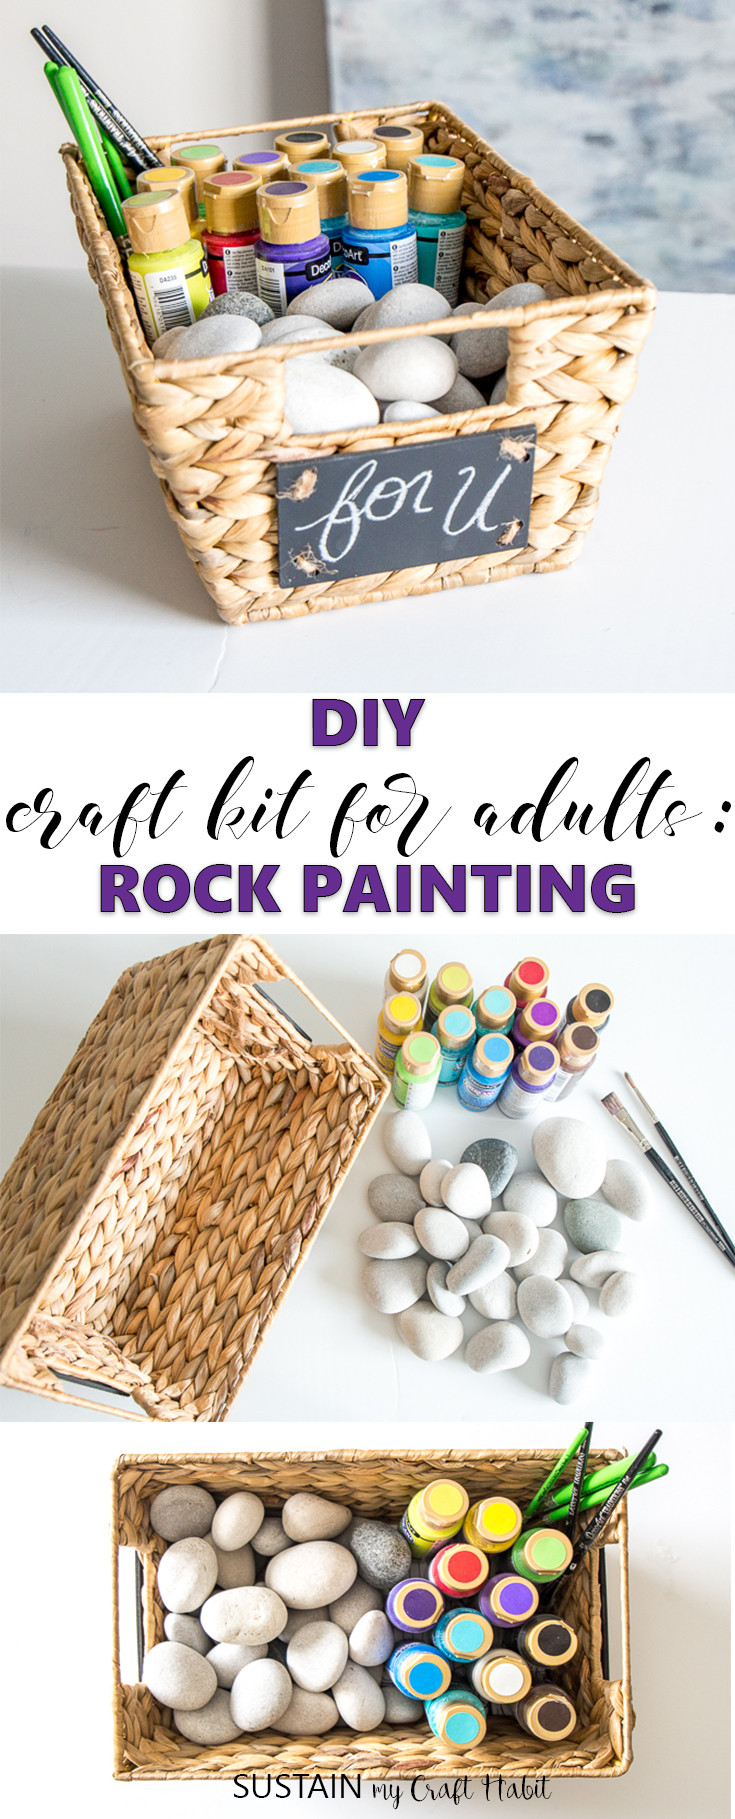 DIY Crafts For Adults
 Make your Own Craft Kit for Adults Rock Painting